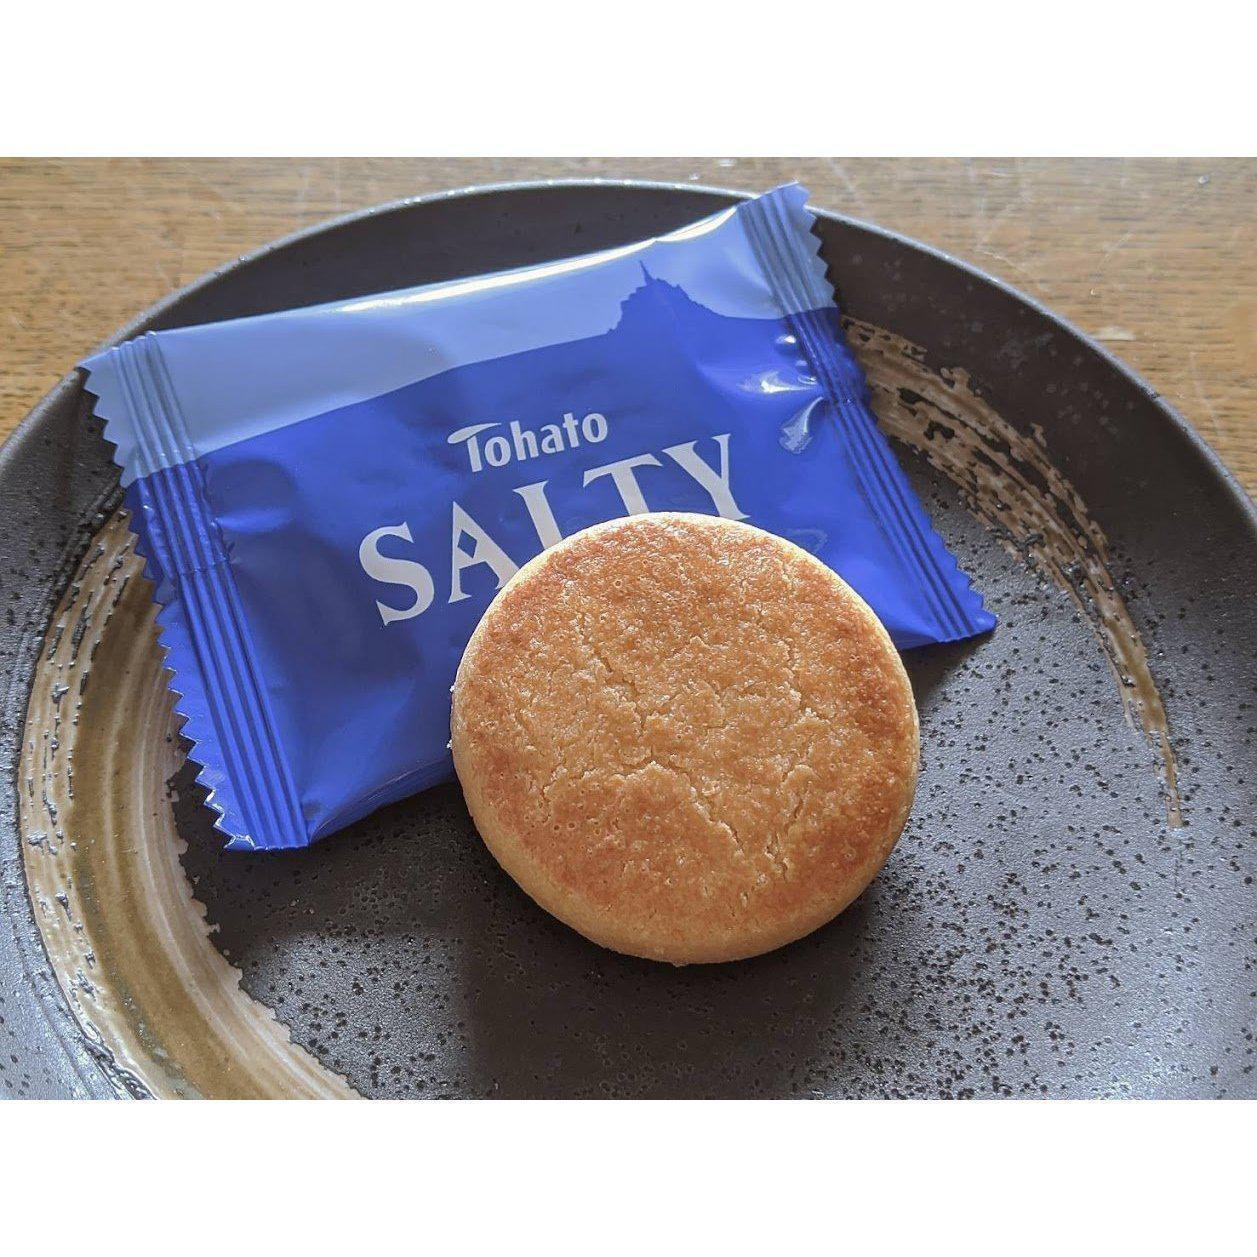 Tohato Salty Salted Butter Biscuits 8 Pieces (Box of 12)